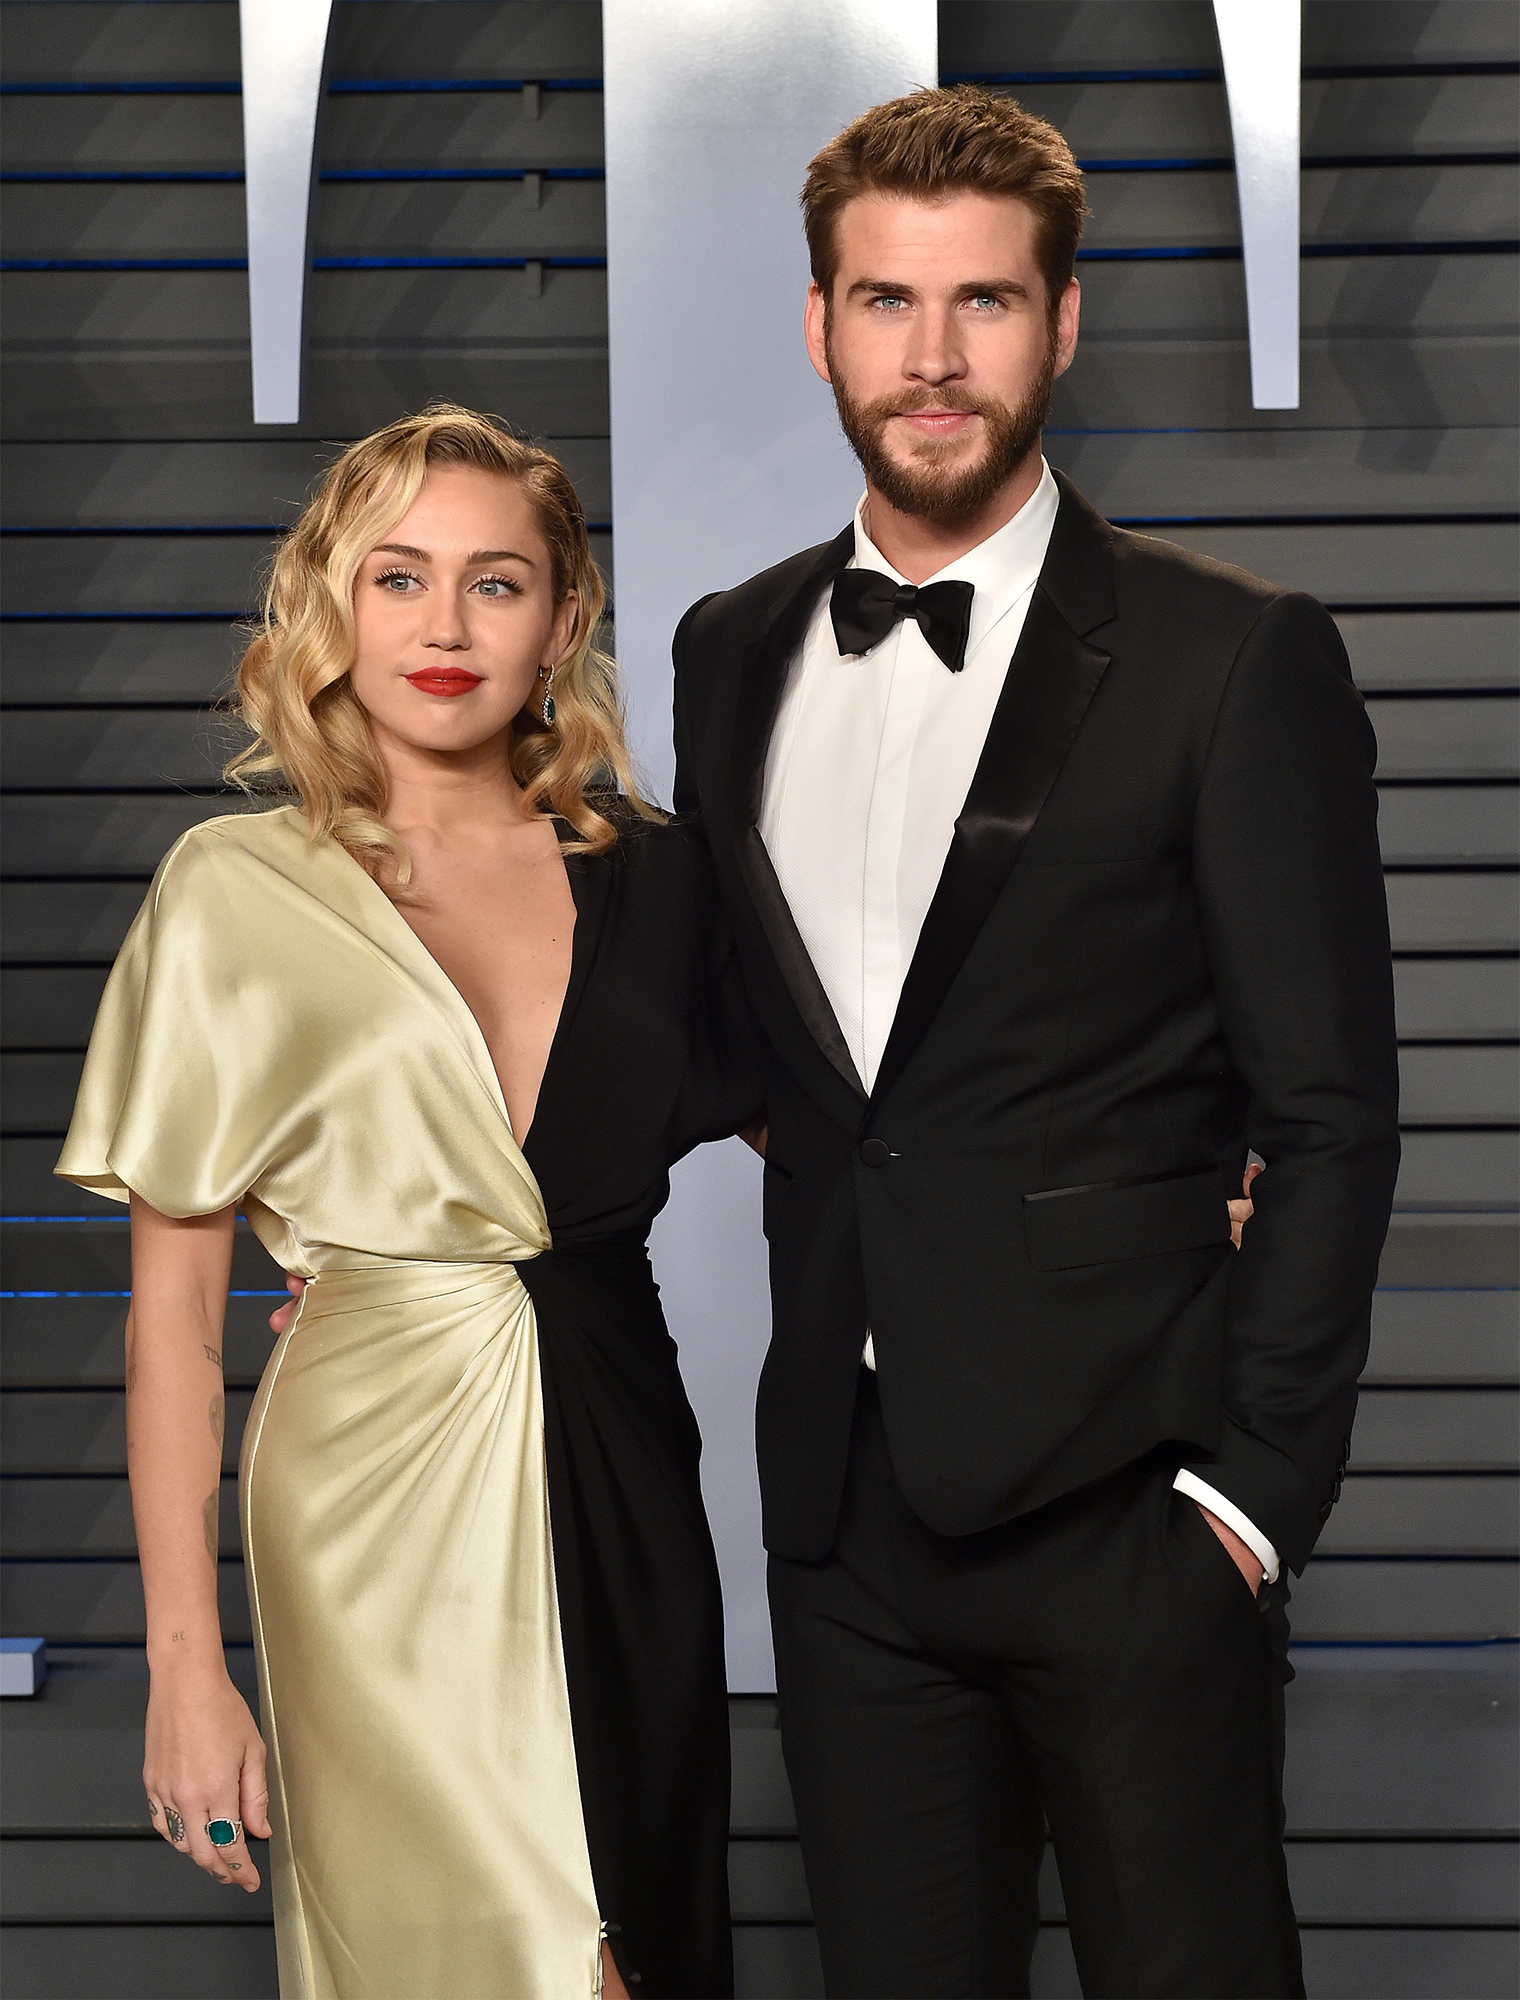 Miley Cyrus & Liam Hemsworth are Married? The Ultimate Source